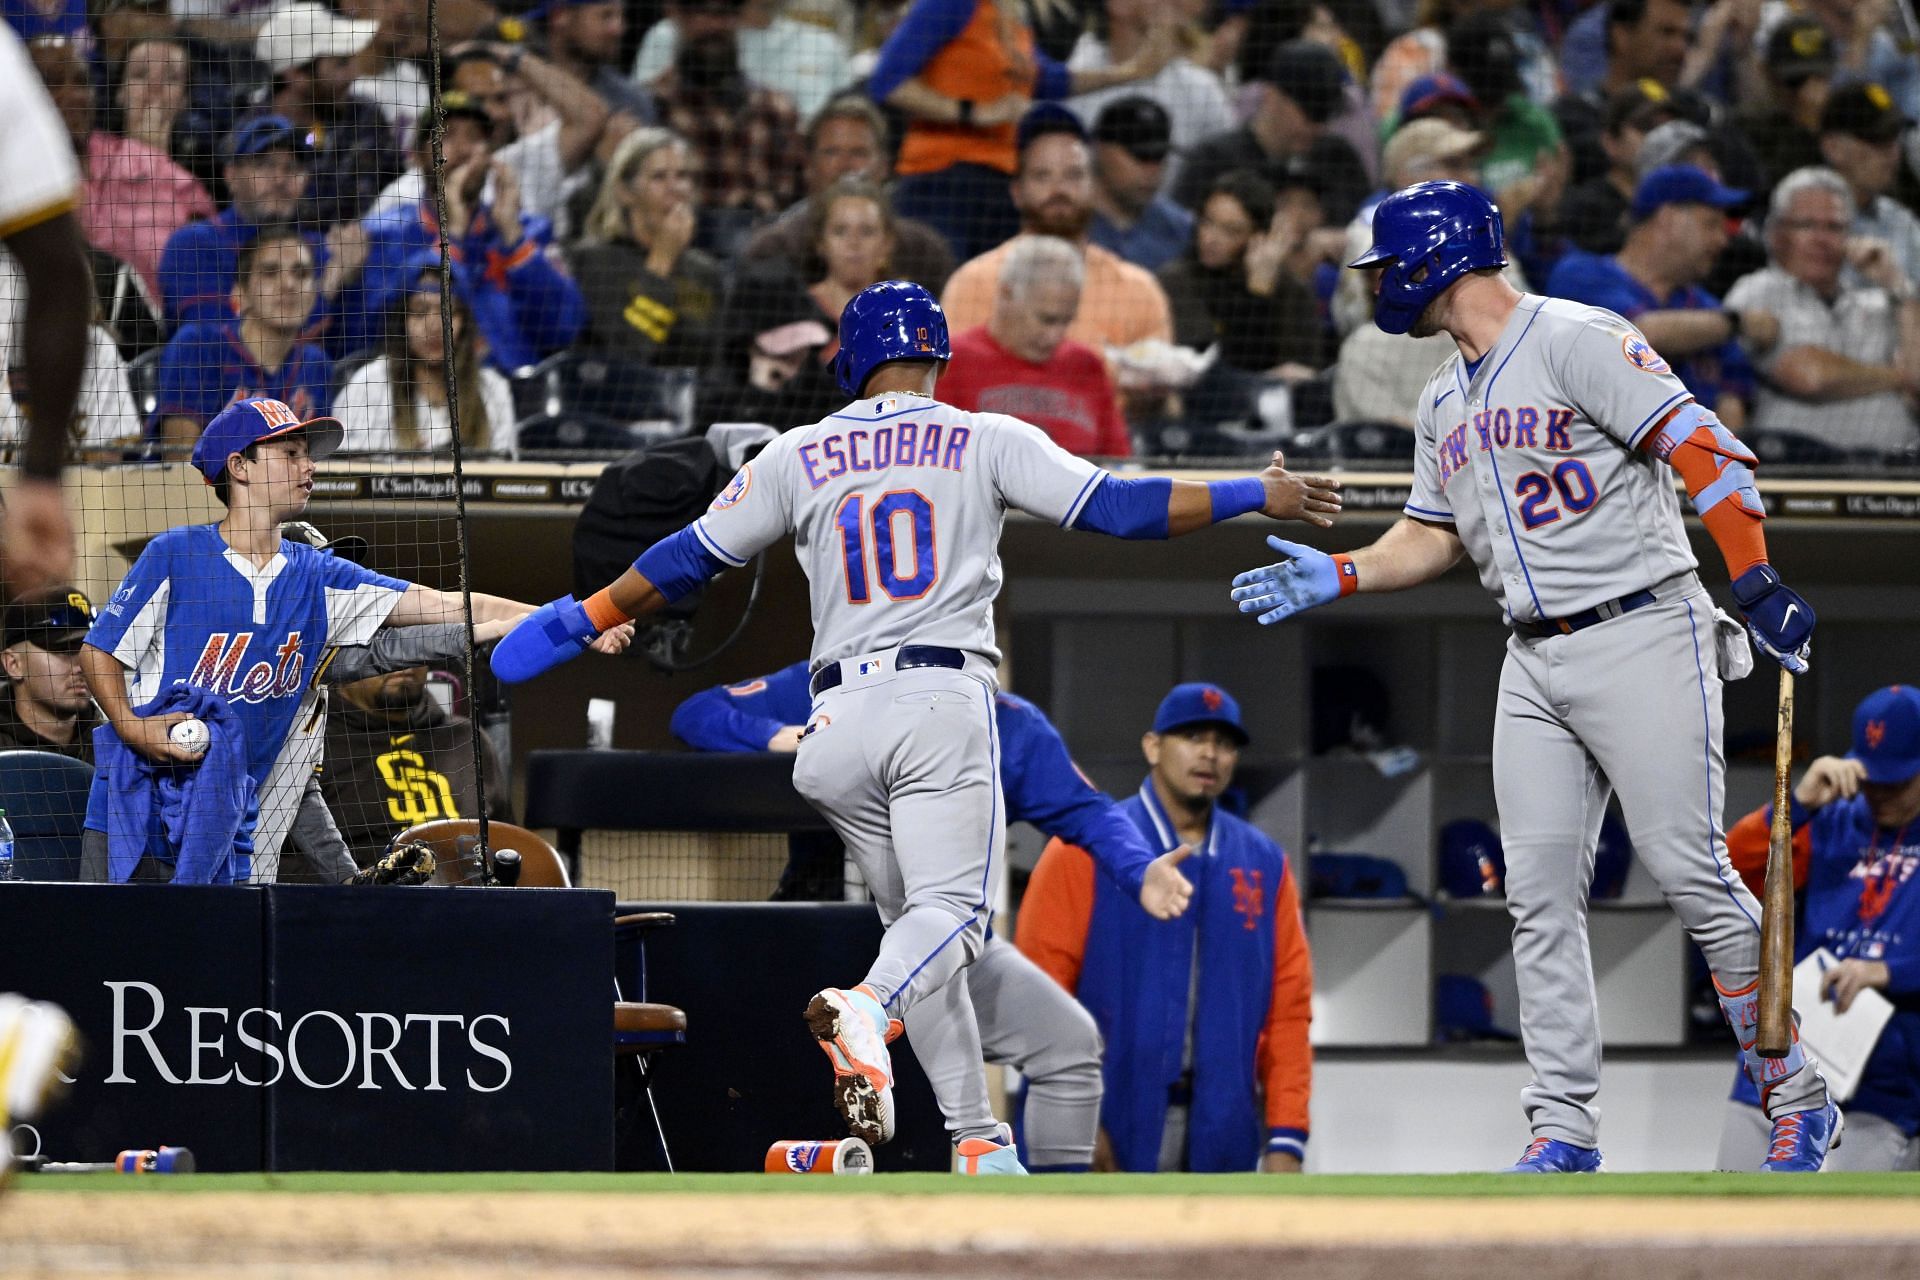 Eduardo Escobar hits for cycle in Mets' win over Padres, why is it